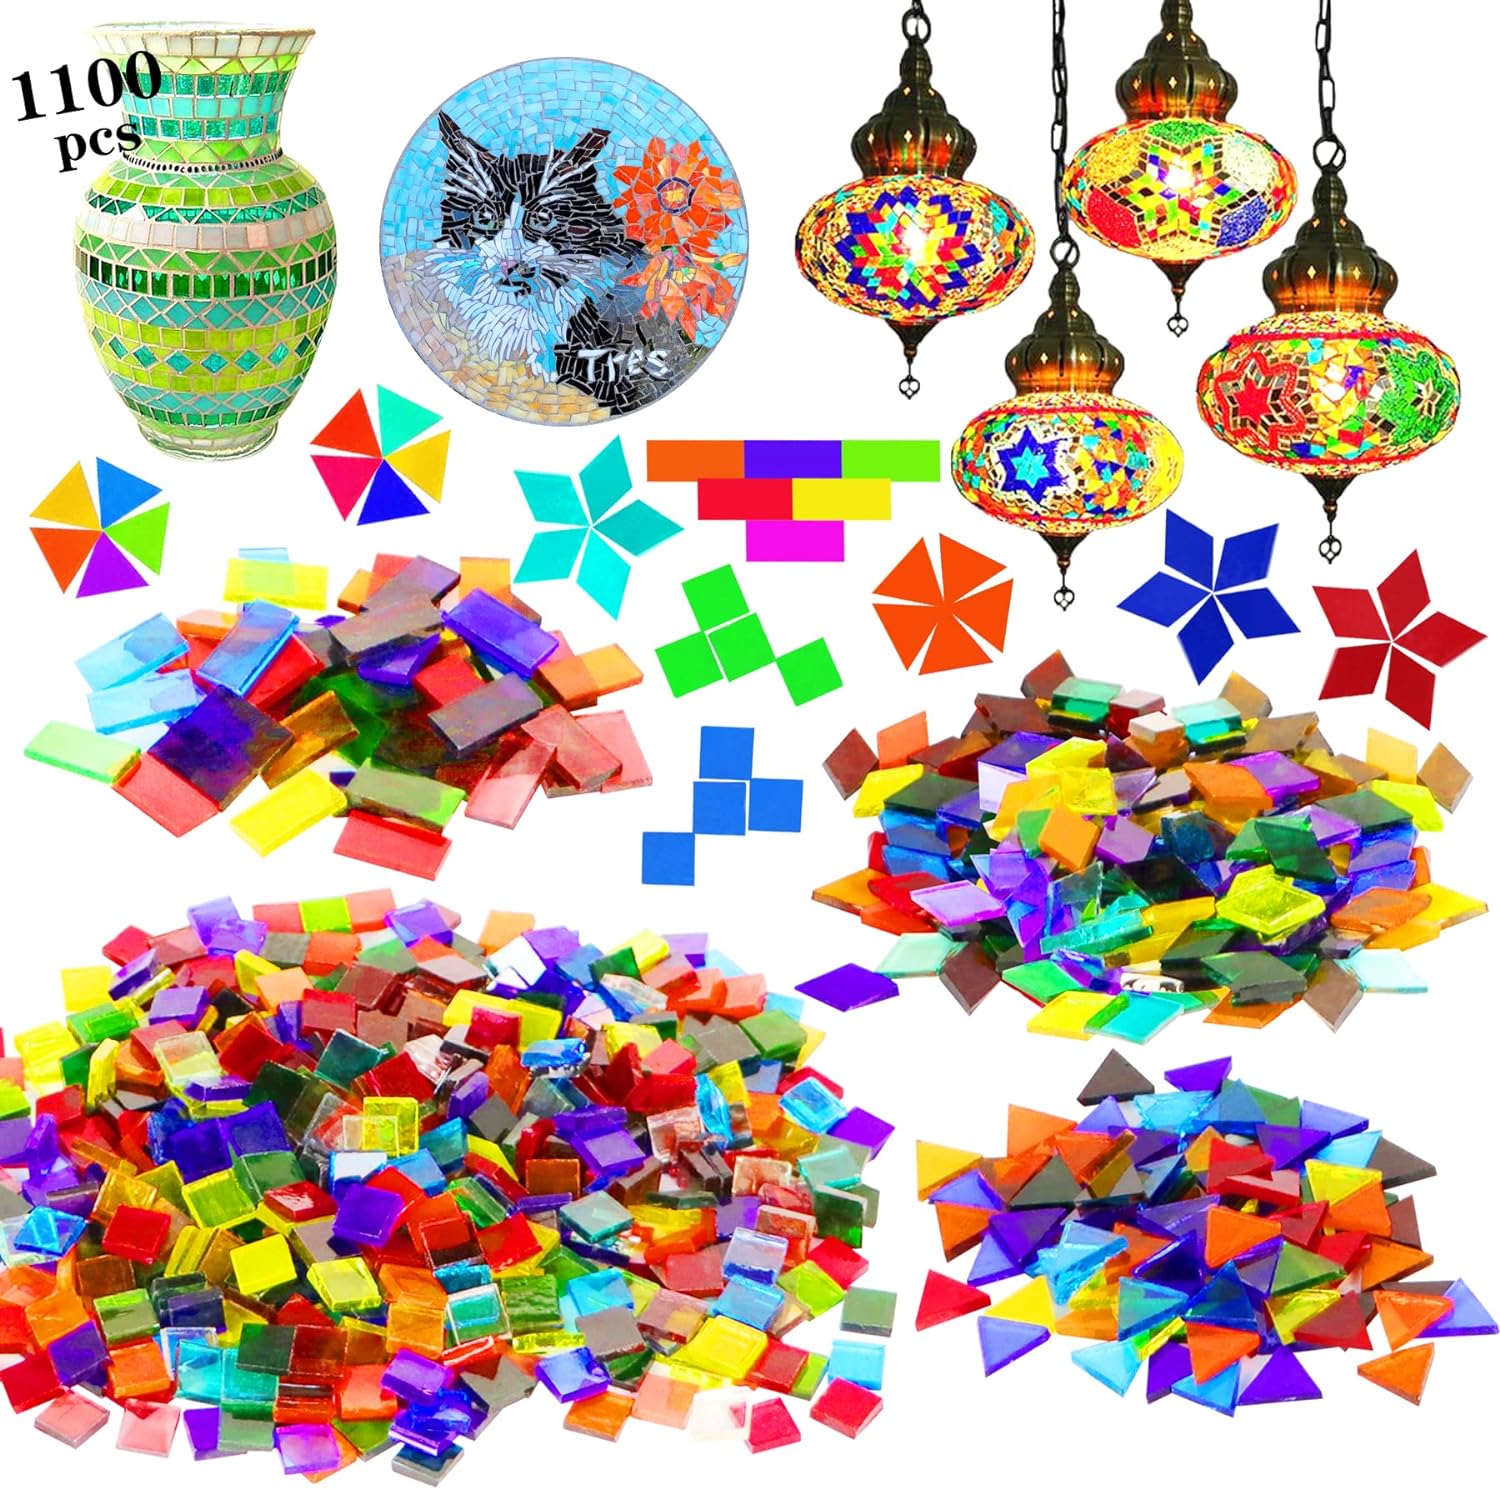 200g Glass Translucent Mosaic Tiles Stained Glass Kit Crafts Bulk Triangle  Shapes Supplies for DIY Picture Frames Flowerpots